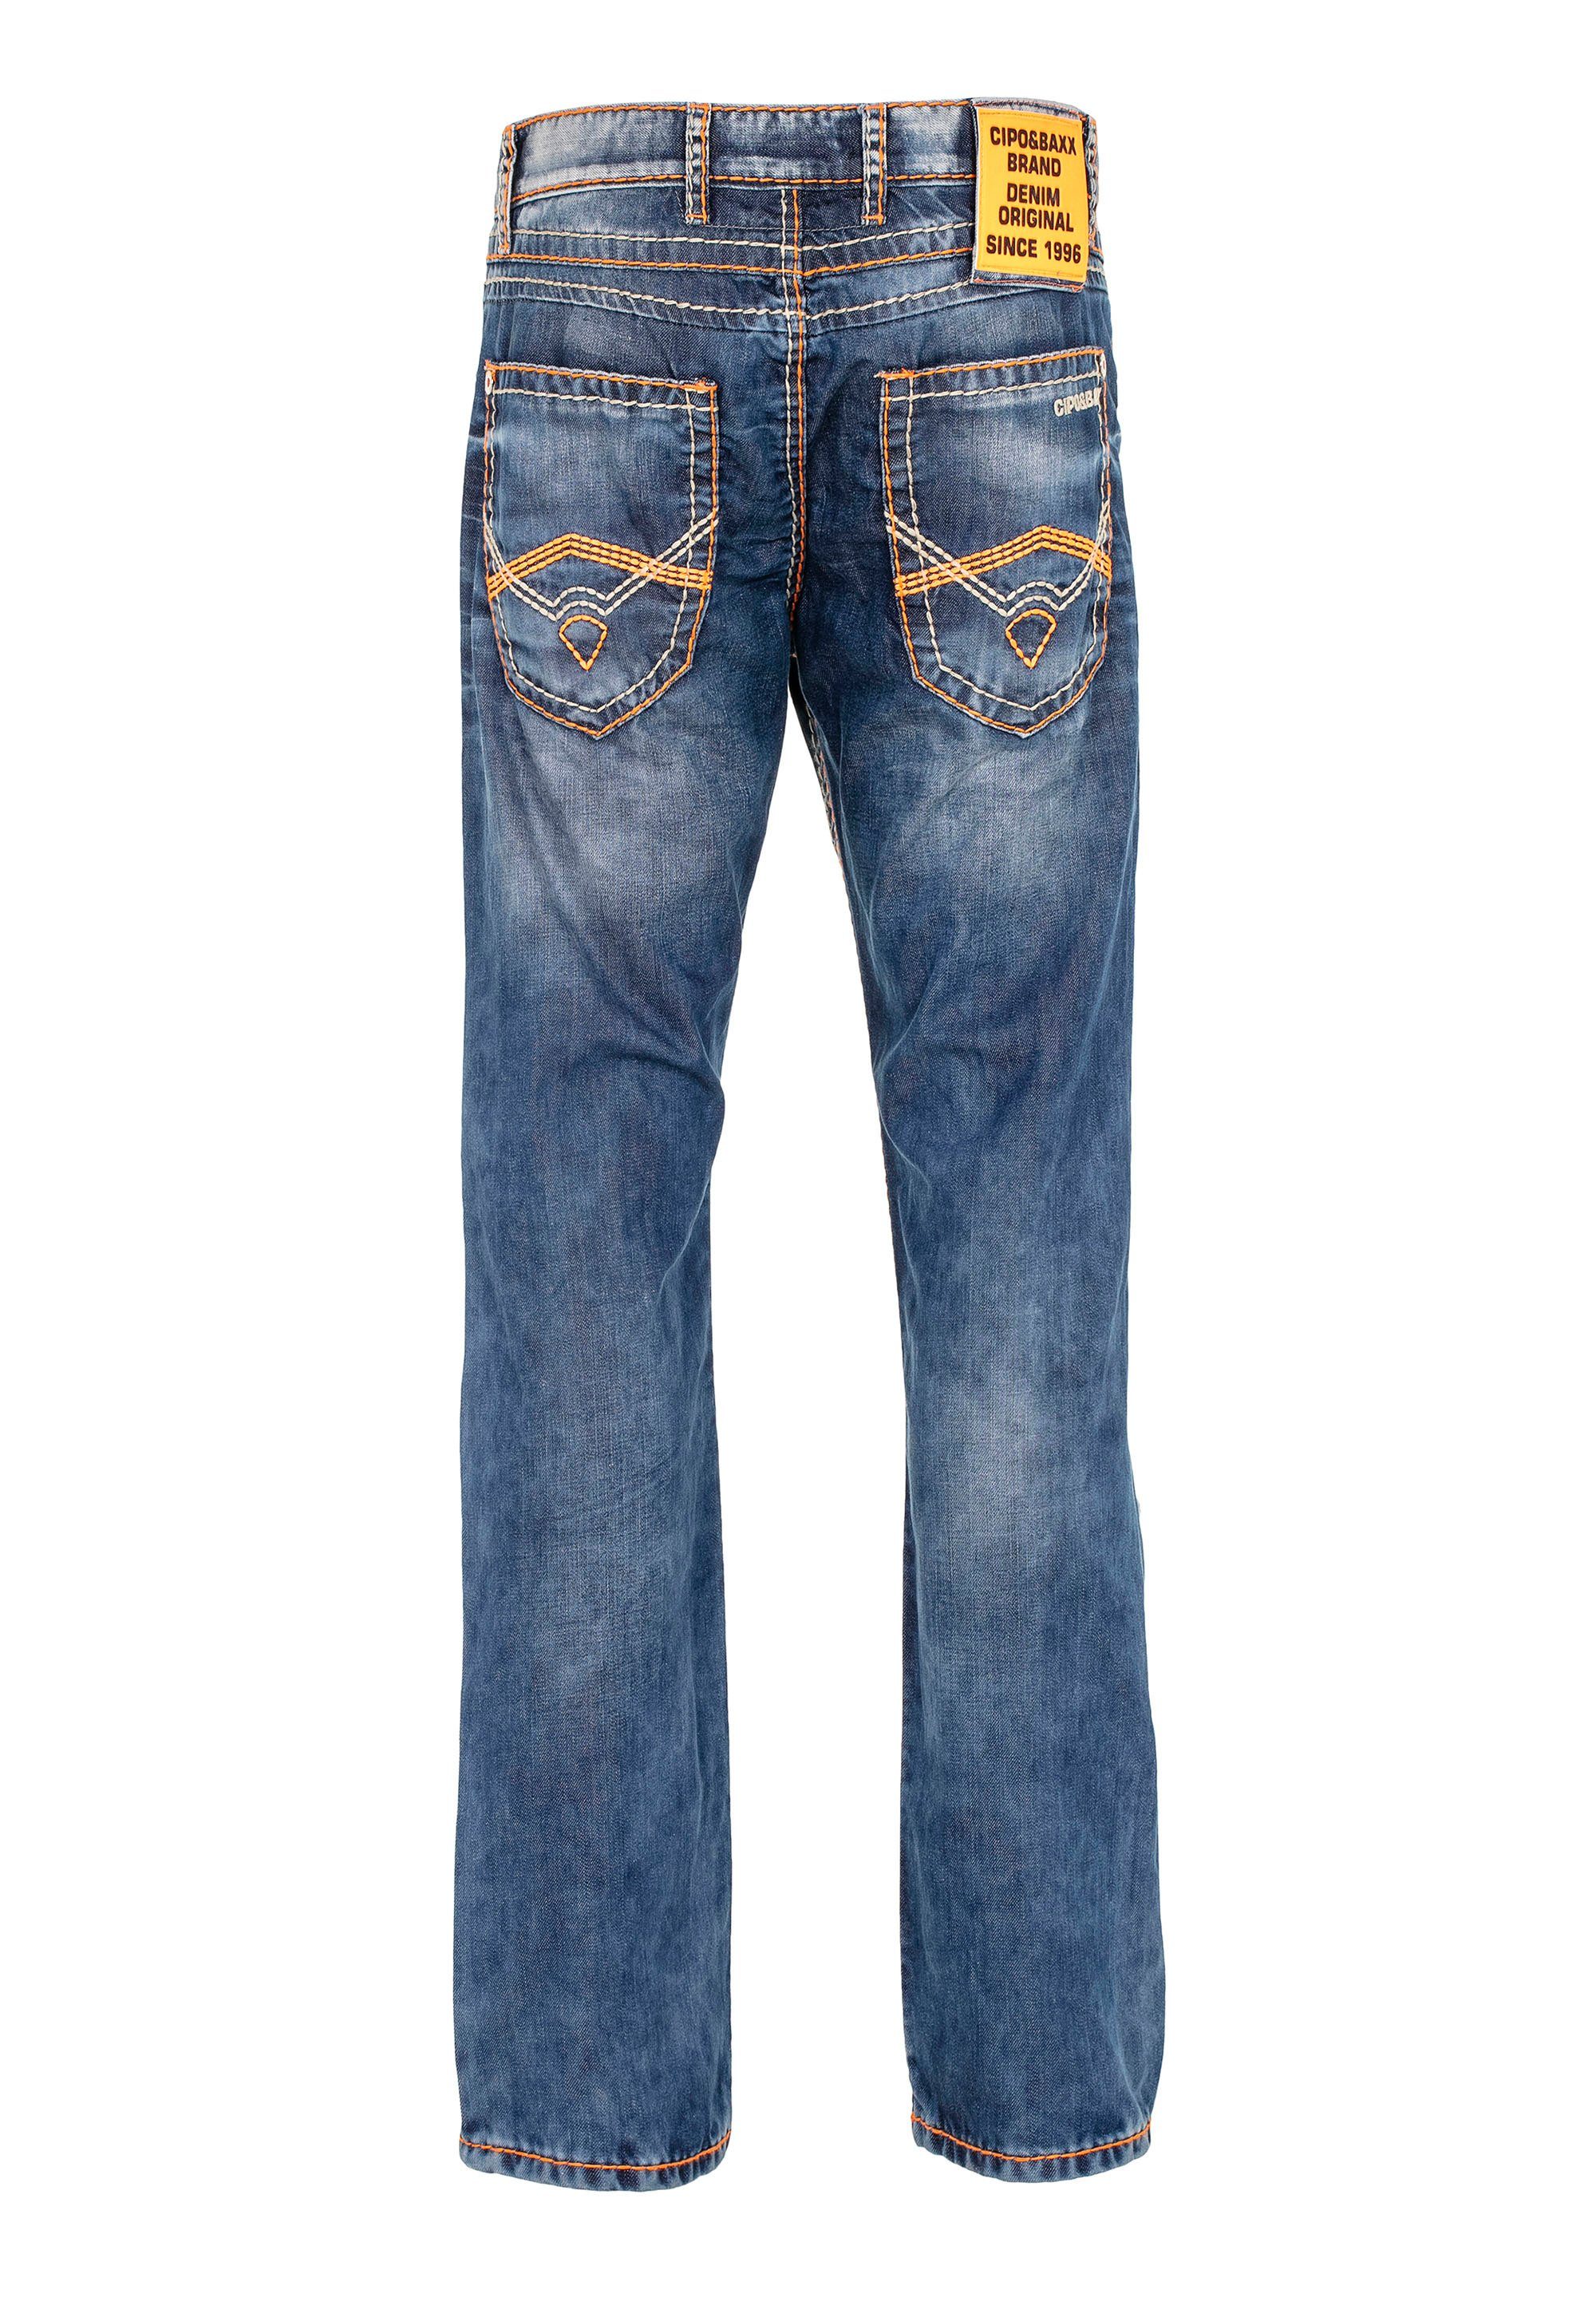 Destroyed-Look Jeans Cipo im & Baxx Bequeme